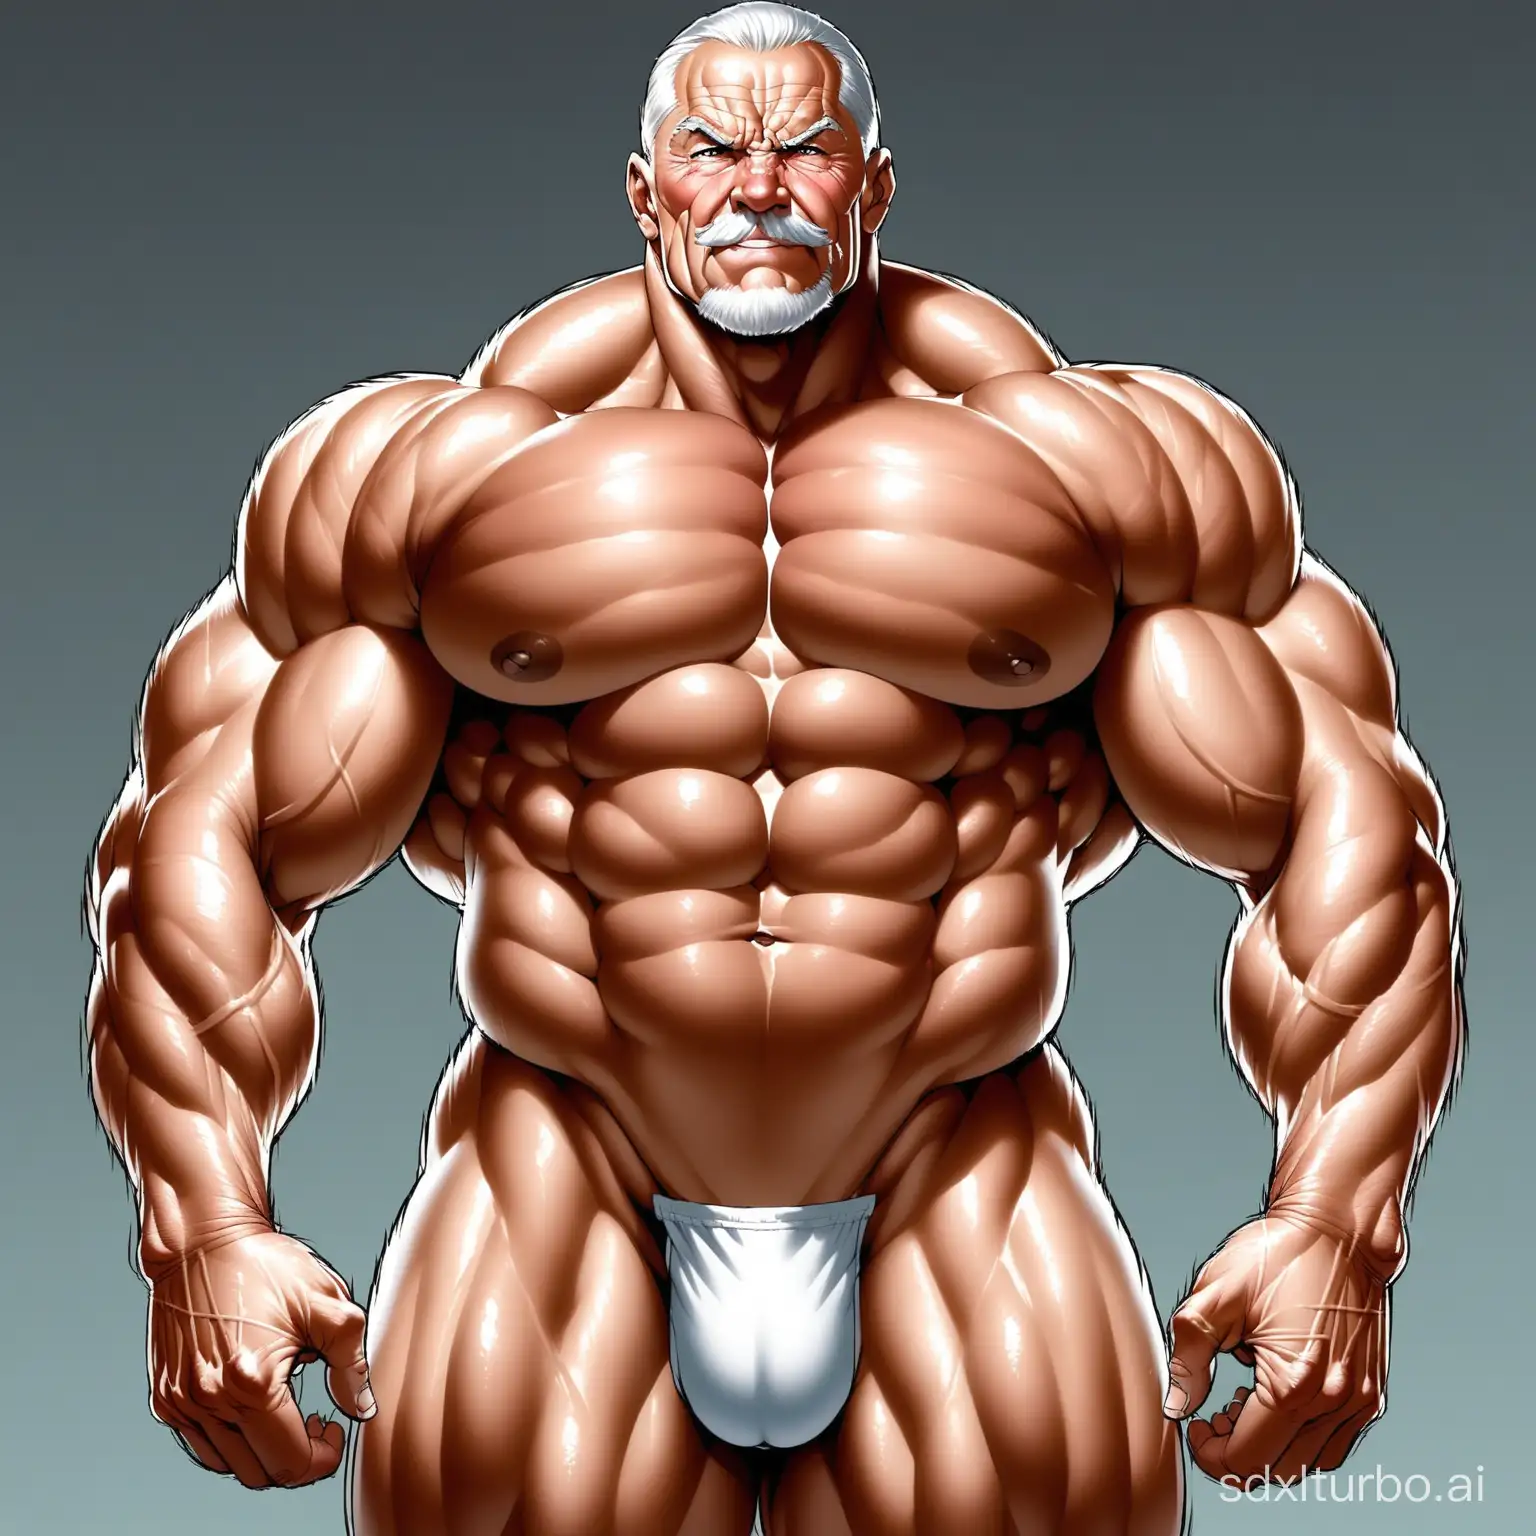 The elderly bodybuilder's naked muscular volume is huge and visible, with the muscles swelling and the glans very large.